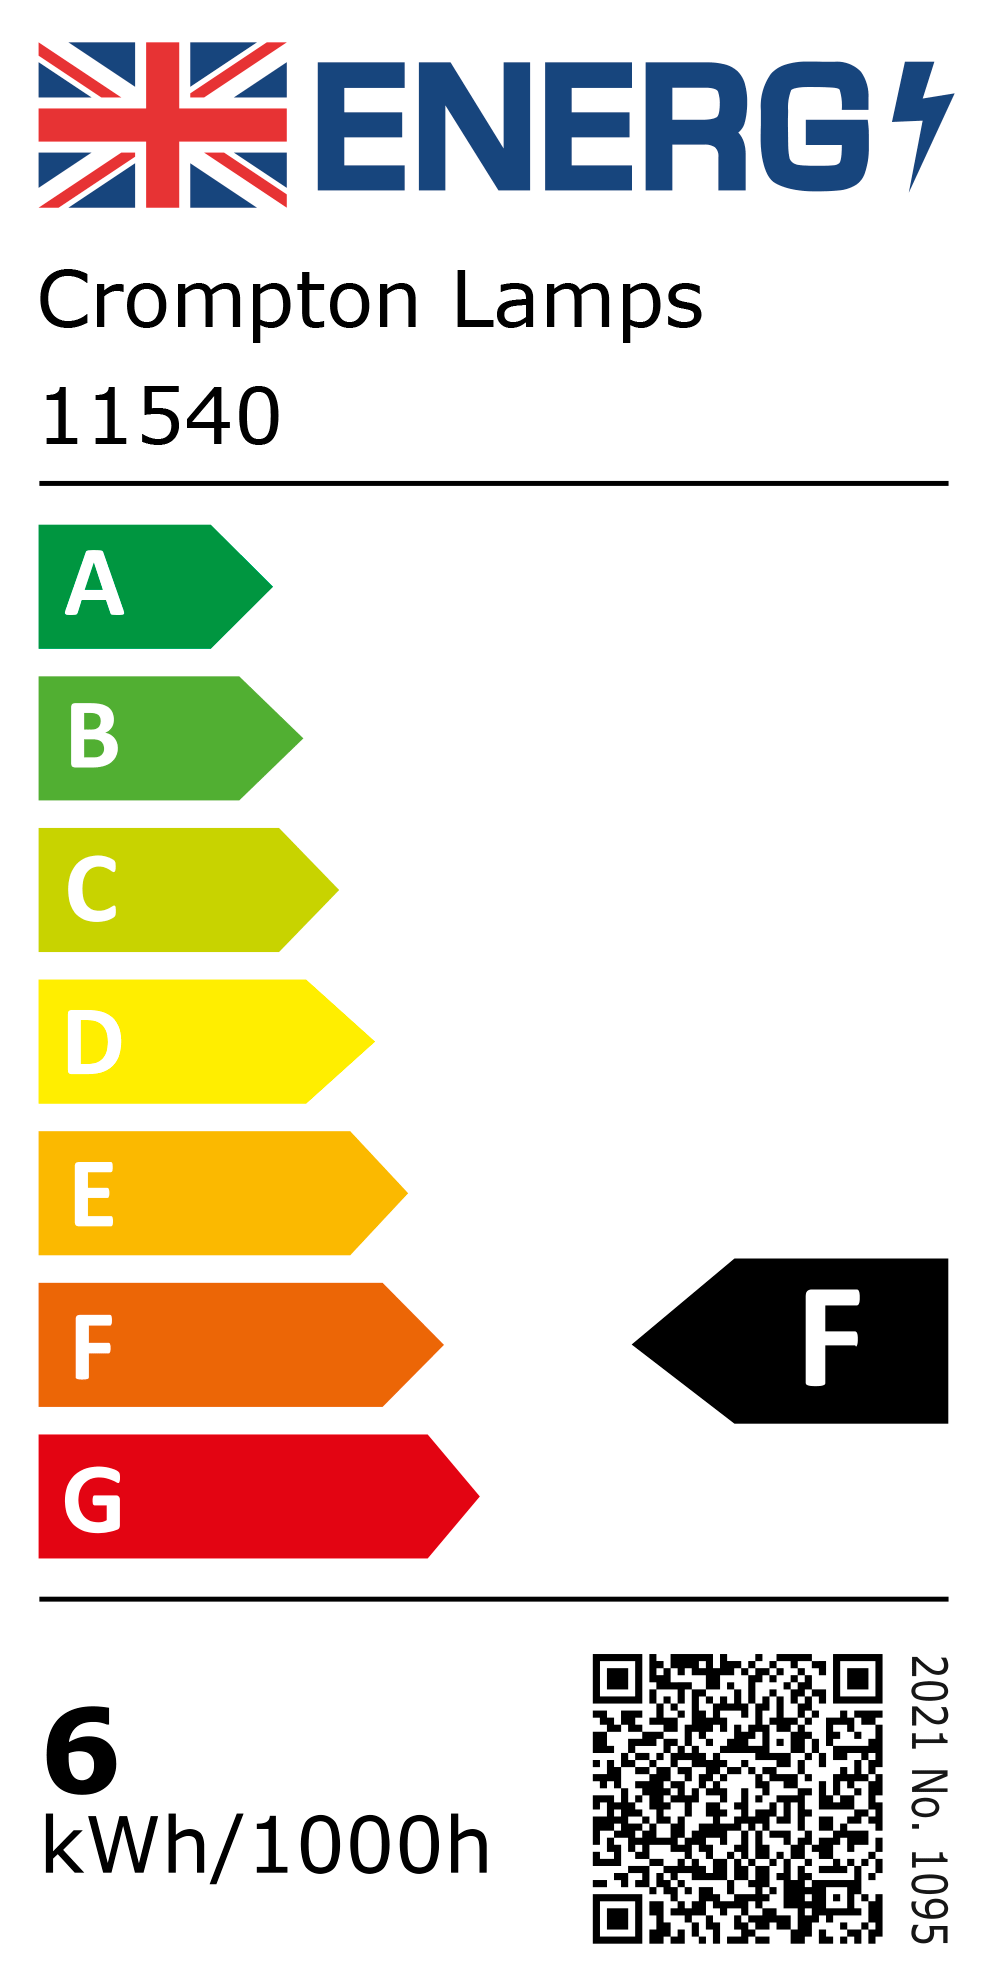 New 2021 Energy Rating Label: Stock Code 11540